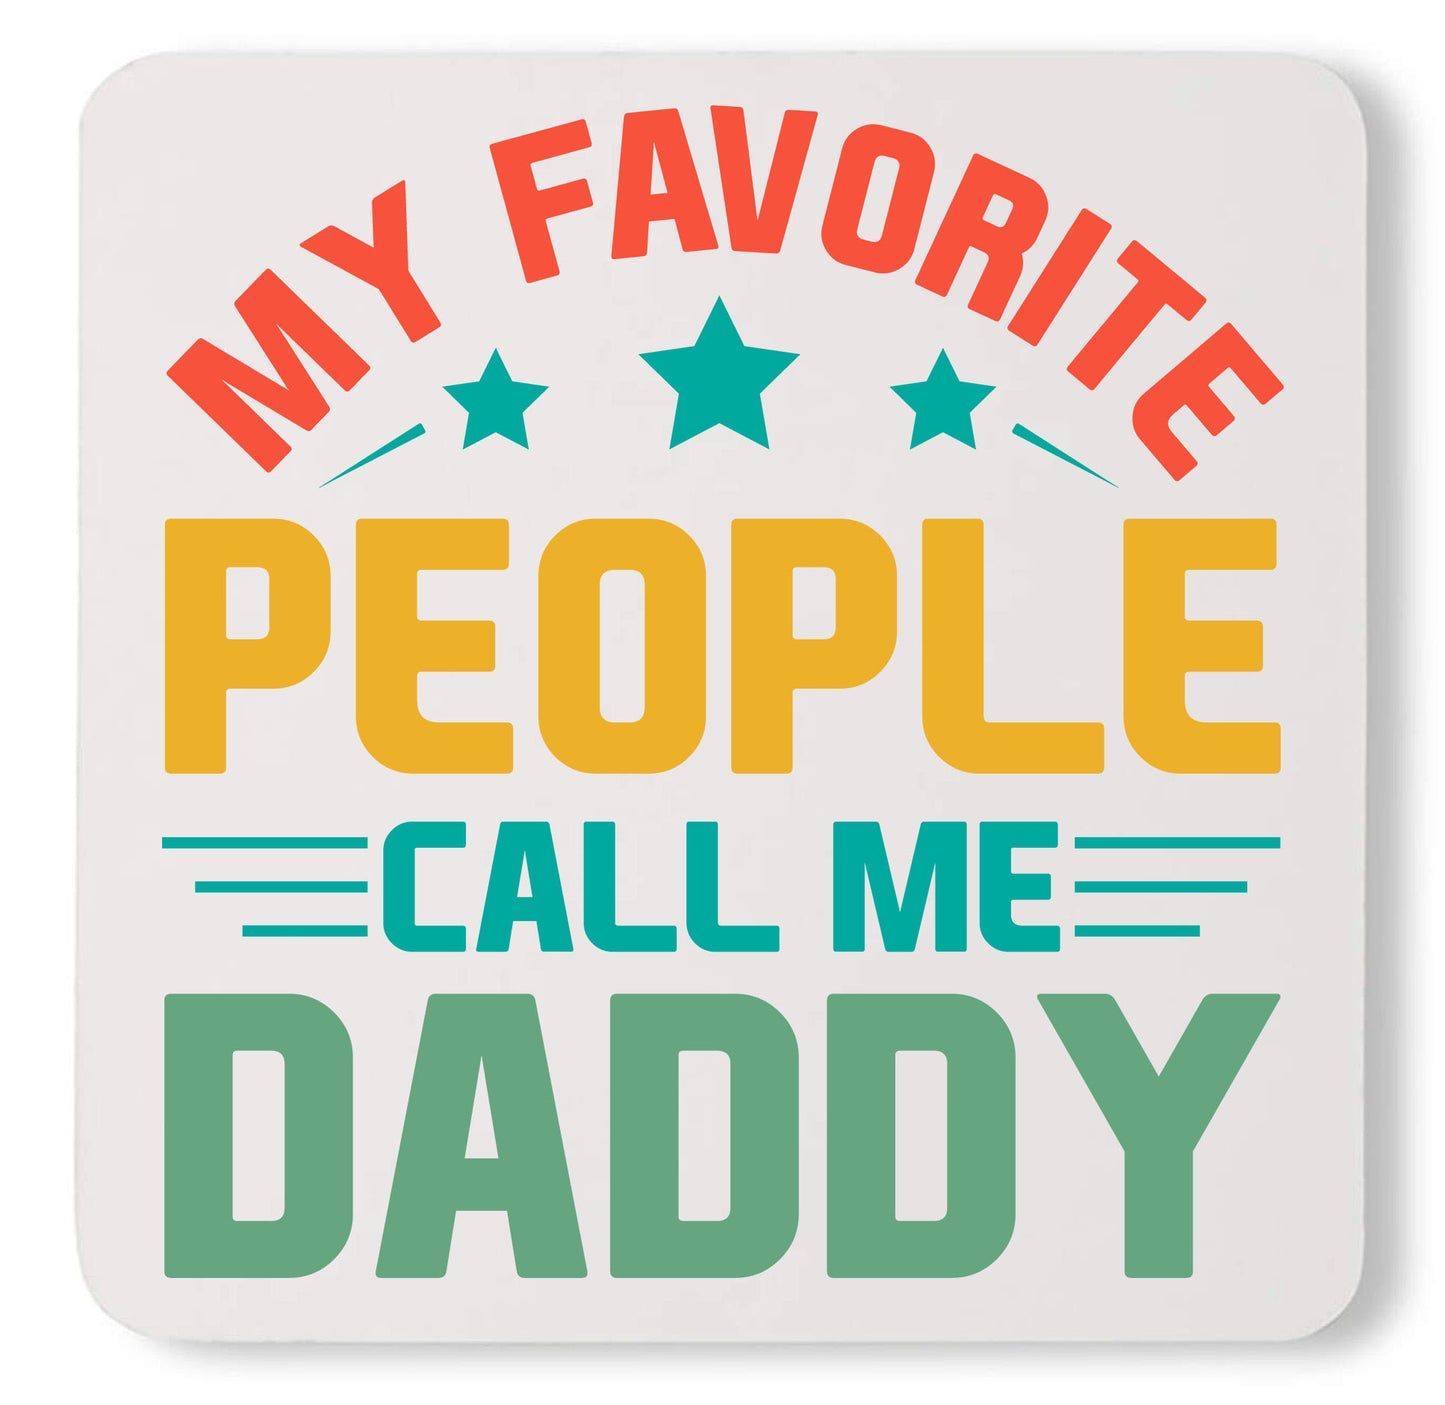 My Favorite People Call Me Daddy Funny Custom Fathers Day Coaster